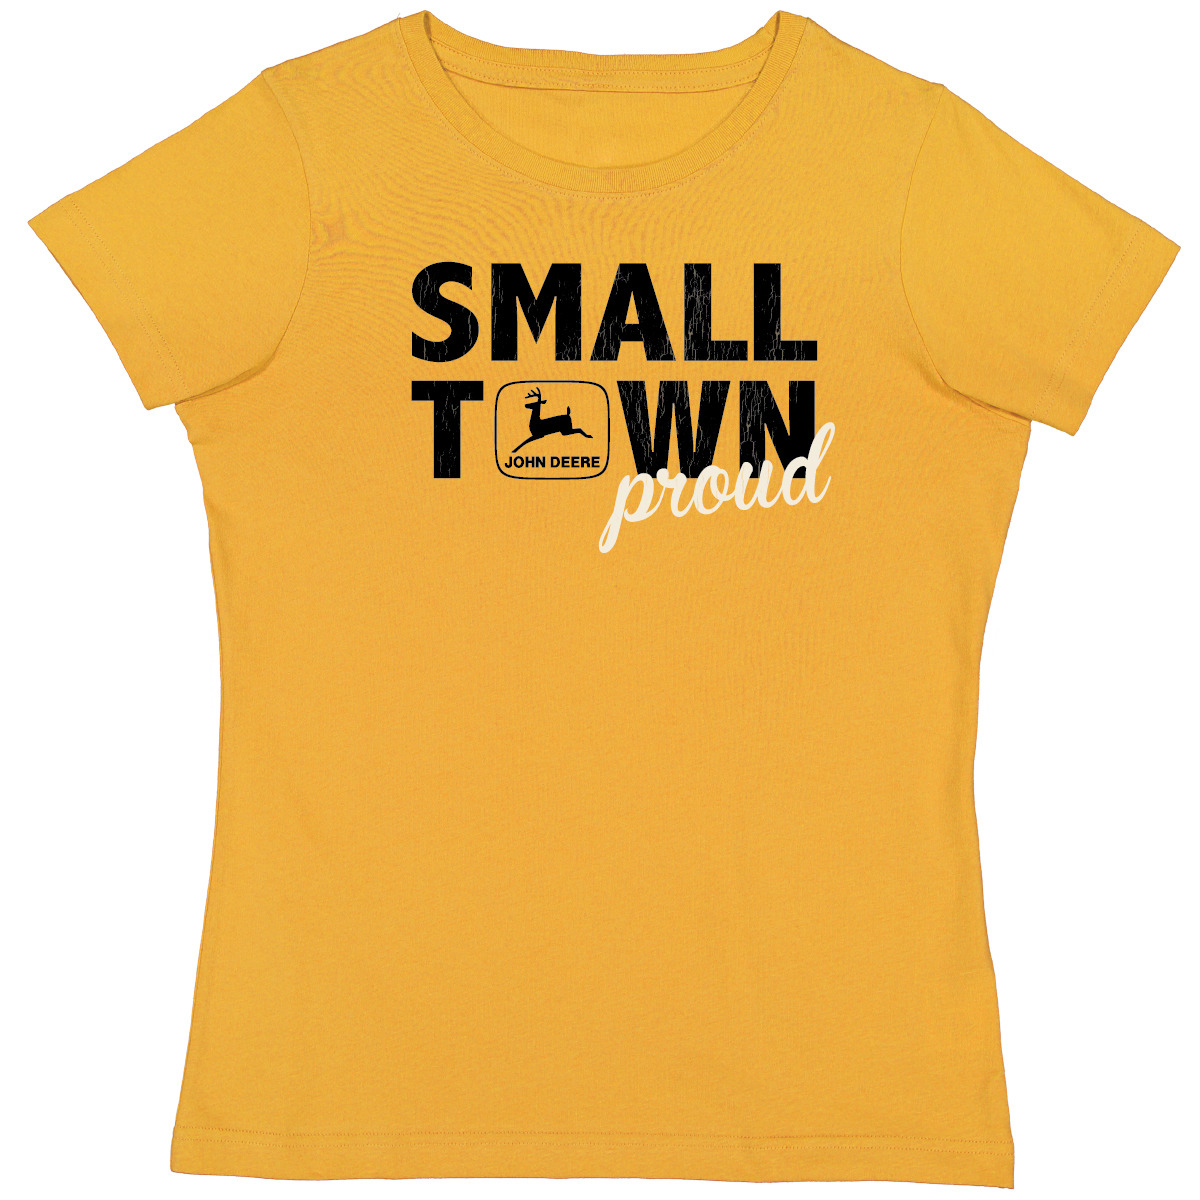 Small Town Proud T-Shirt